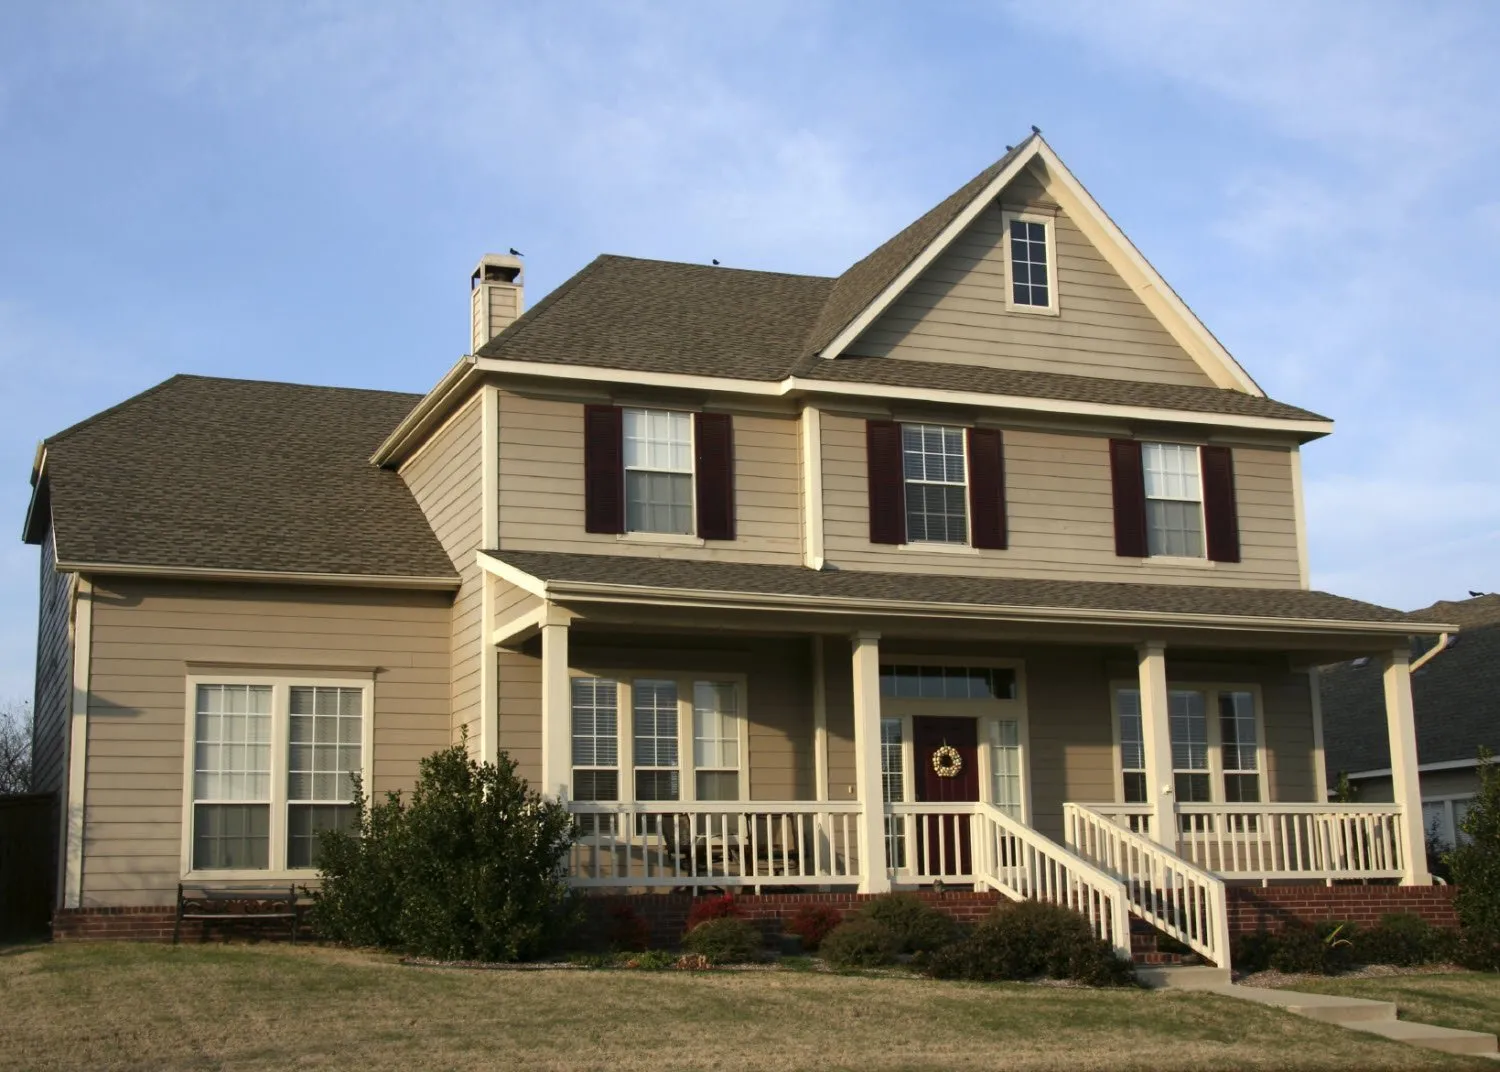 Large two-story home with front porch and new gray-beige vinyl siding.